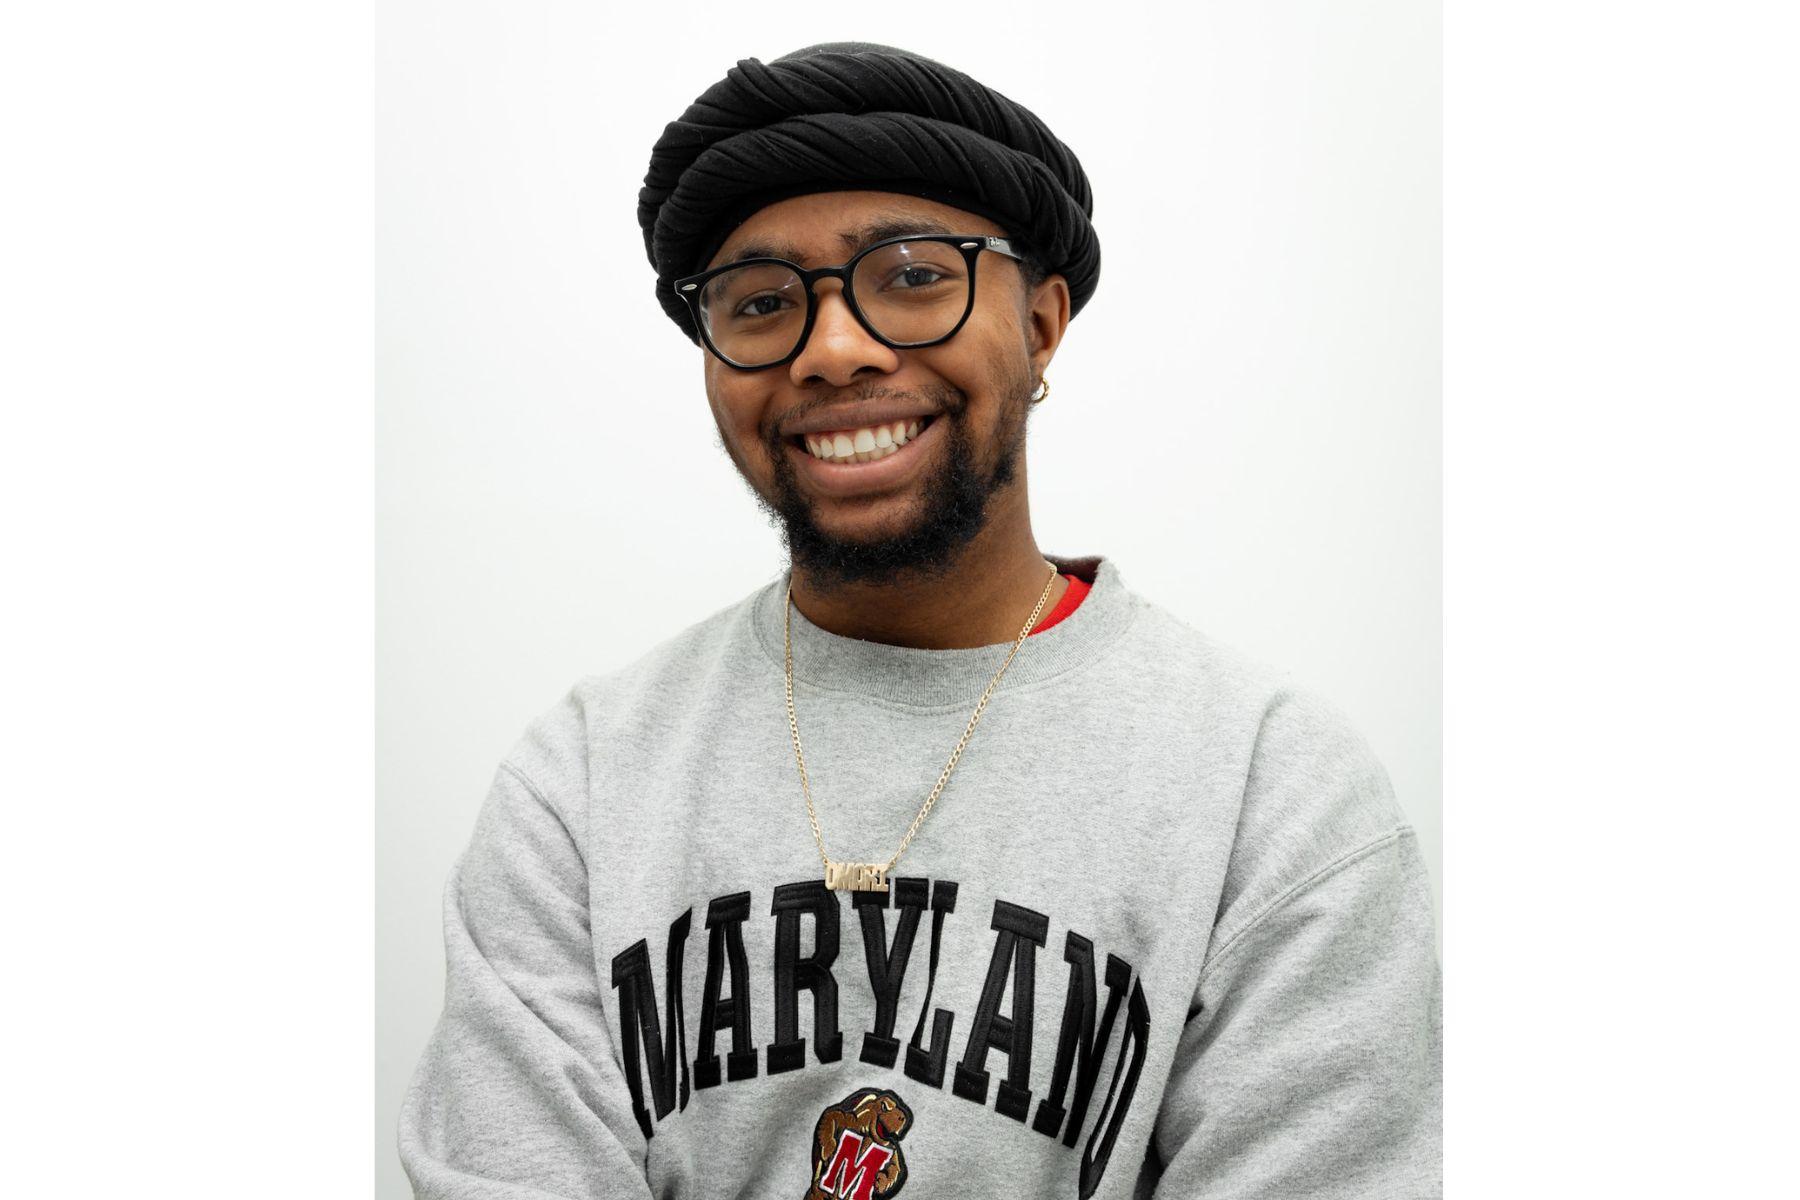 Omari is wearing a gray Maryland sweatshirt and is smiling at the camera